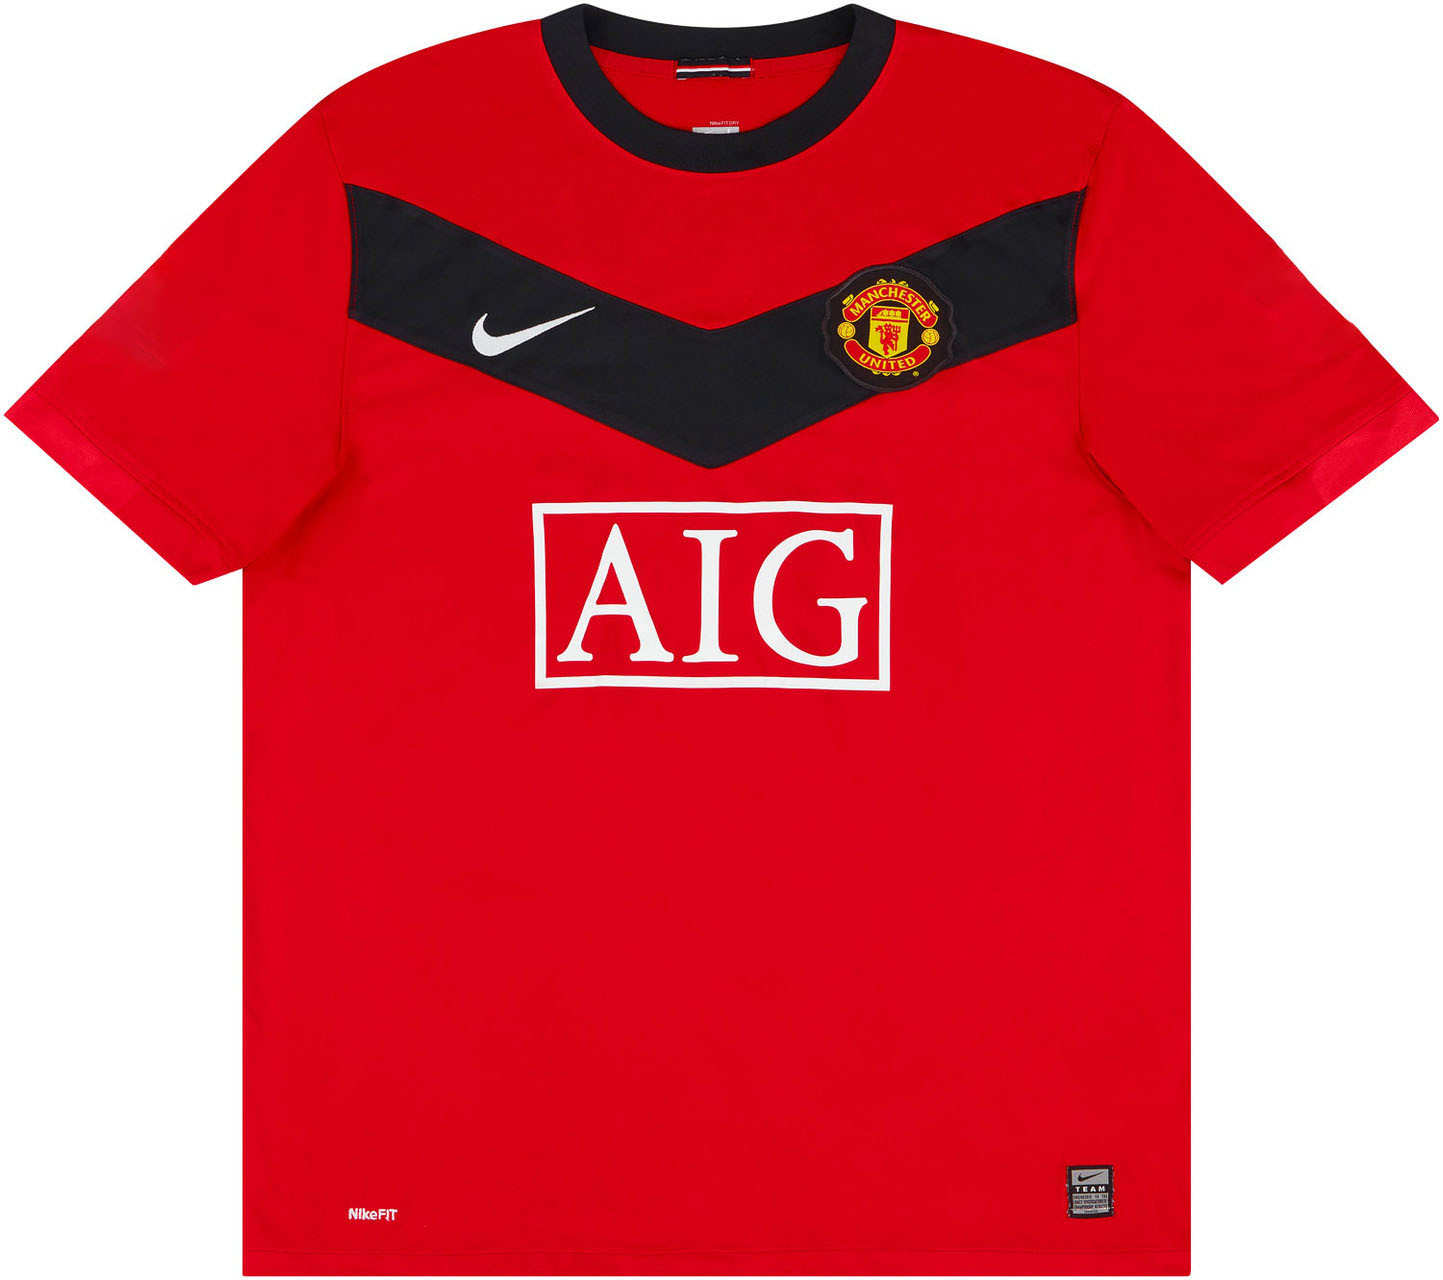 2009-10 Manchester United Home Shirt